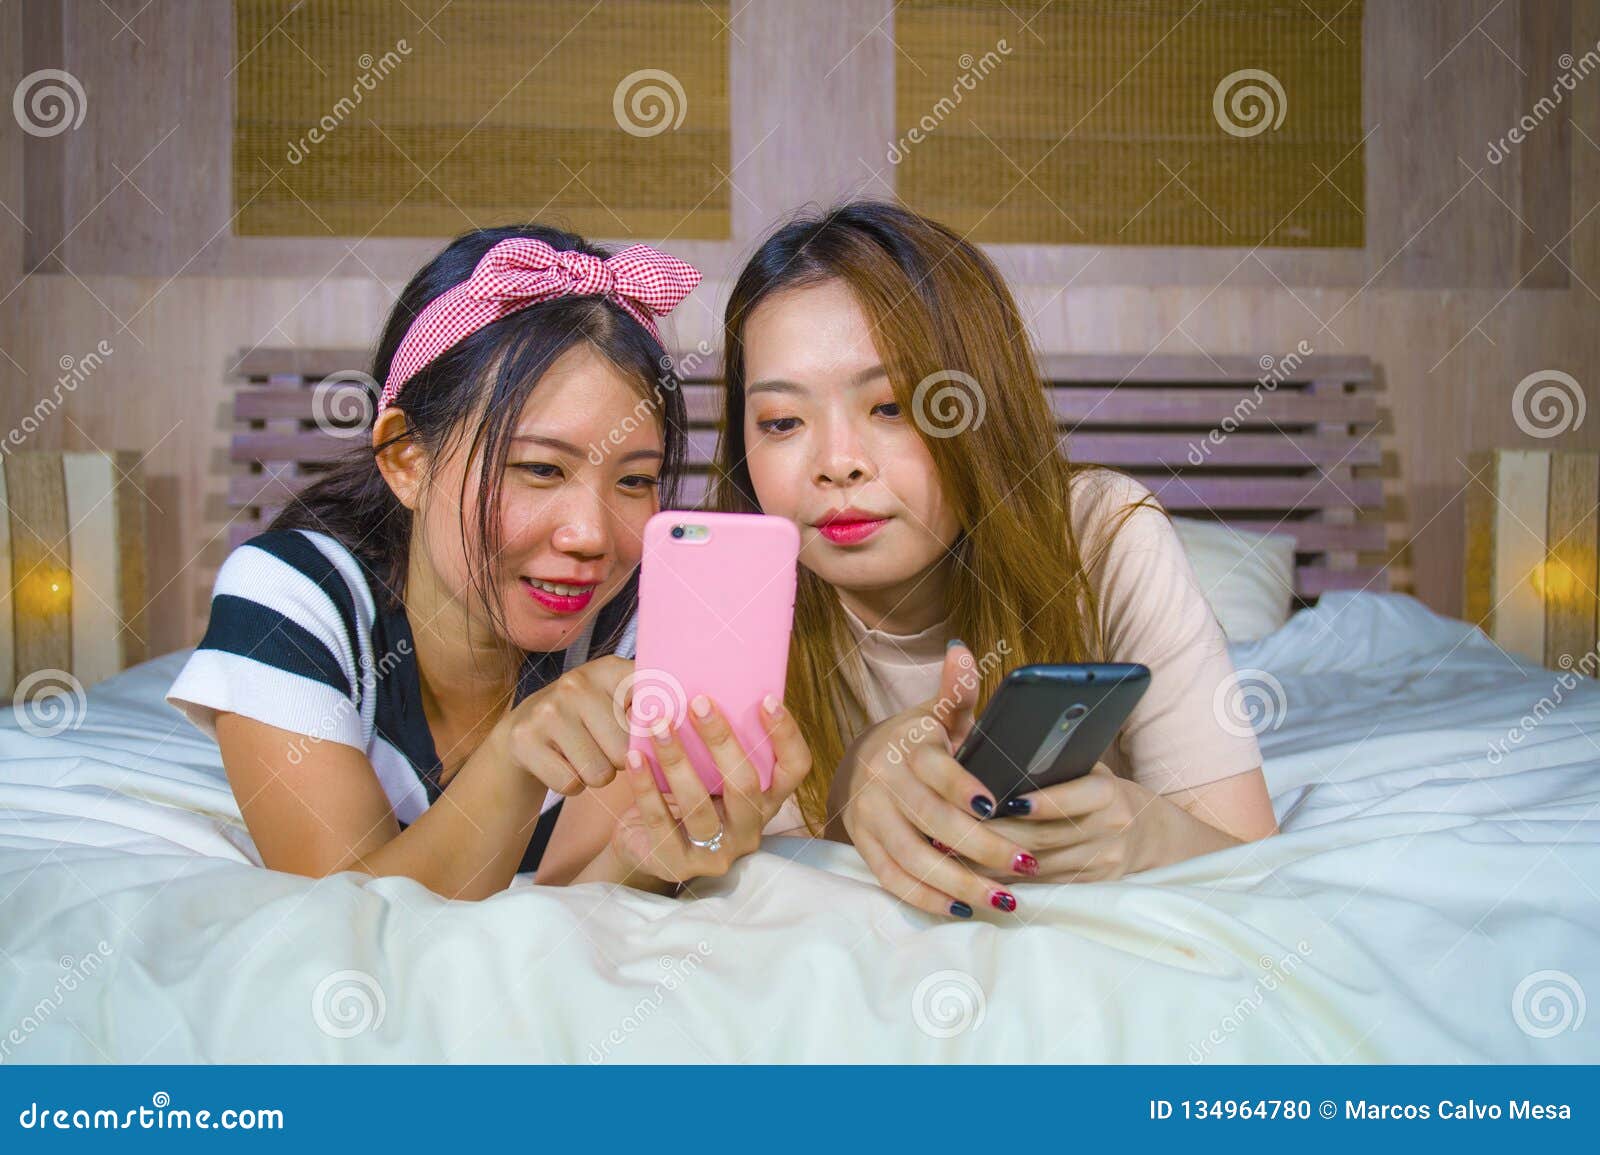 https://thumbs.dreamstime.com/z/two-young-happy-pretty-asian-chinese-girlfriends-sitting-home-bedroom-laughing-talking-having-fun-using-internet-social-134964780.jpg